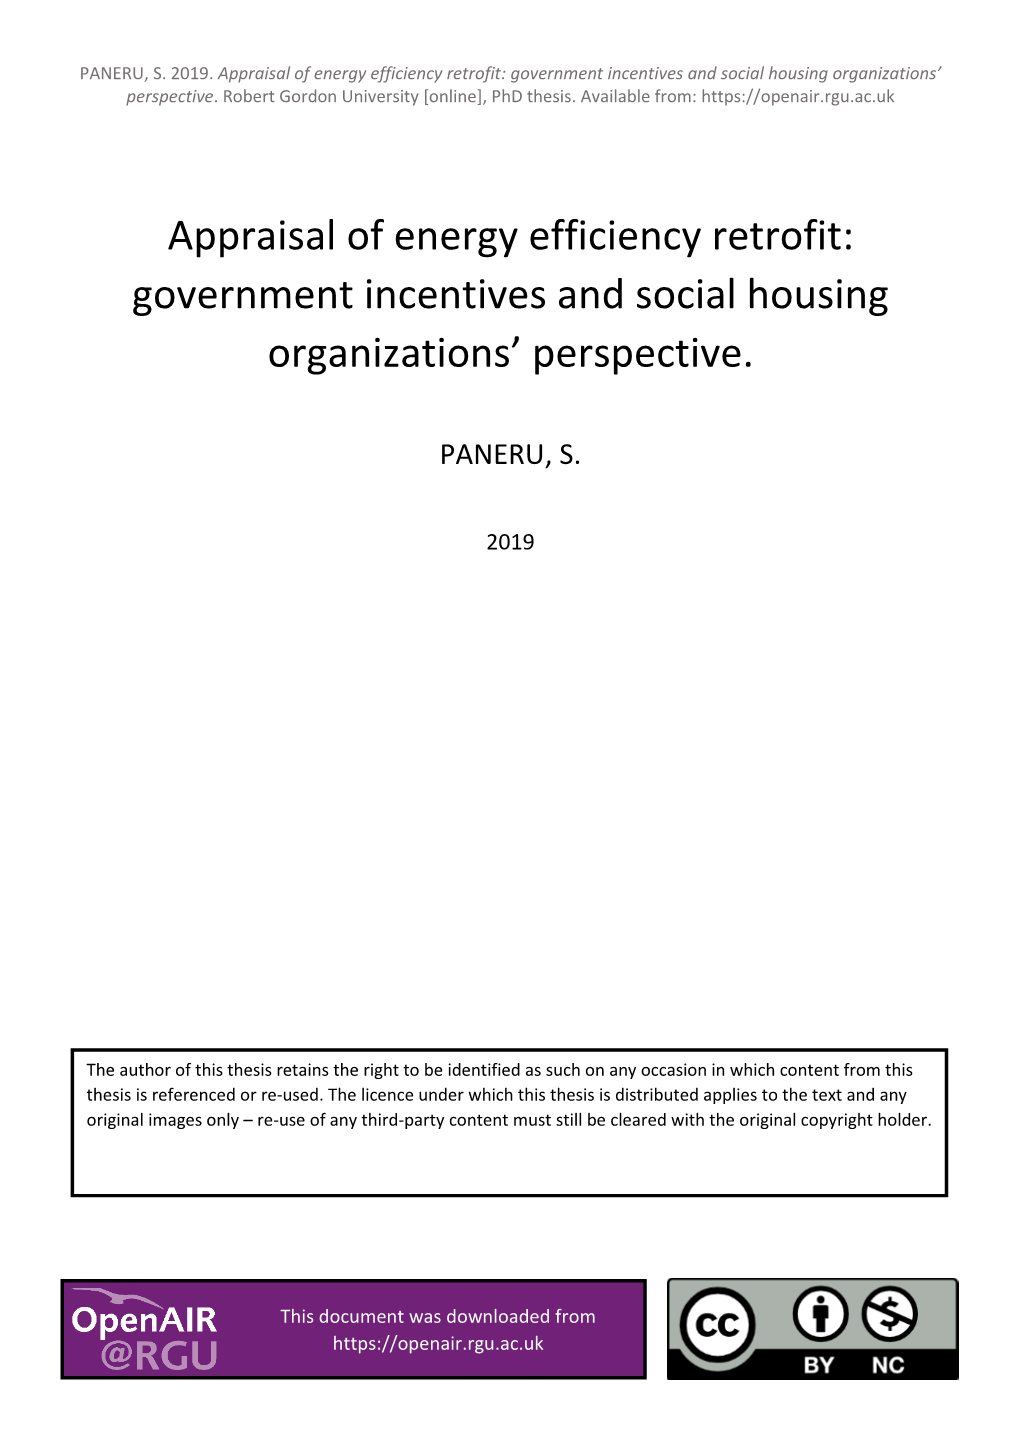 Appraisal of Energy Efficiency Retrofit: Government Incentives and Social Housing Organizations’ Perspective